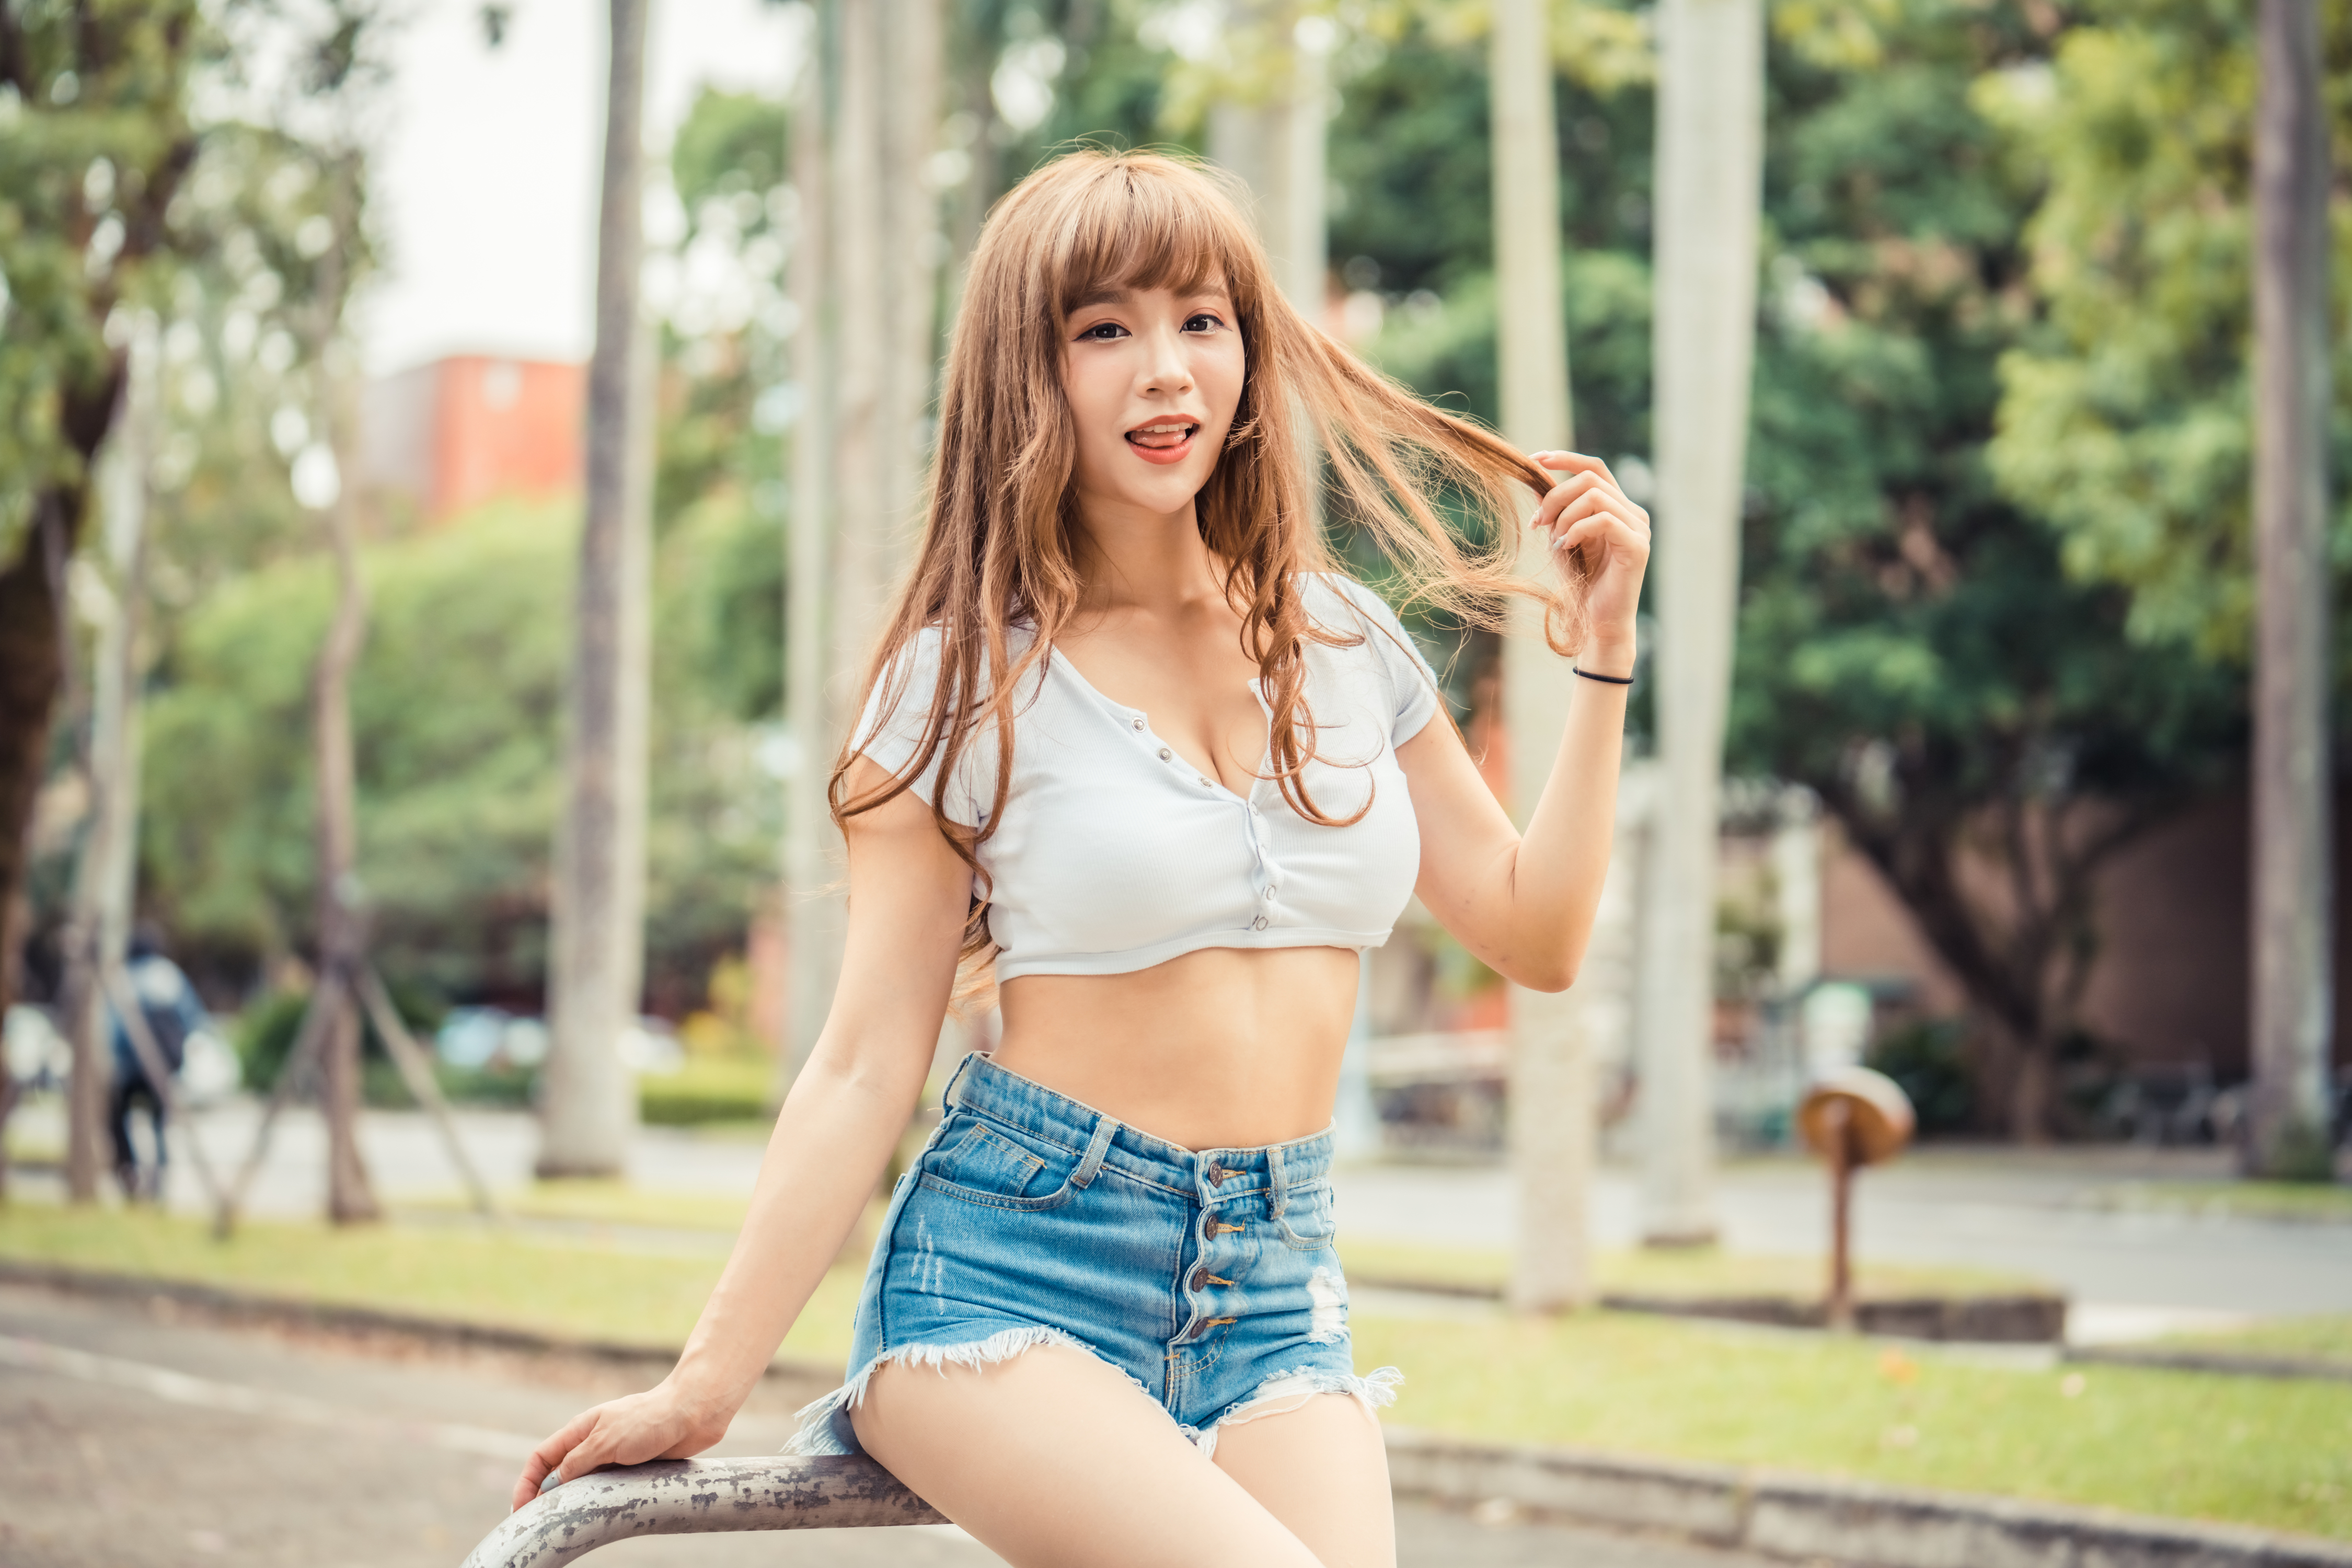 People 4500x3000 Asian women model brunette looking at viewer touching hair bangs tongues white tops cleavage short shorts jean shorts denim sitting depth of field portrait women outdoors outdoors belly